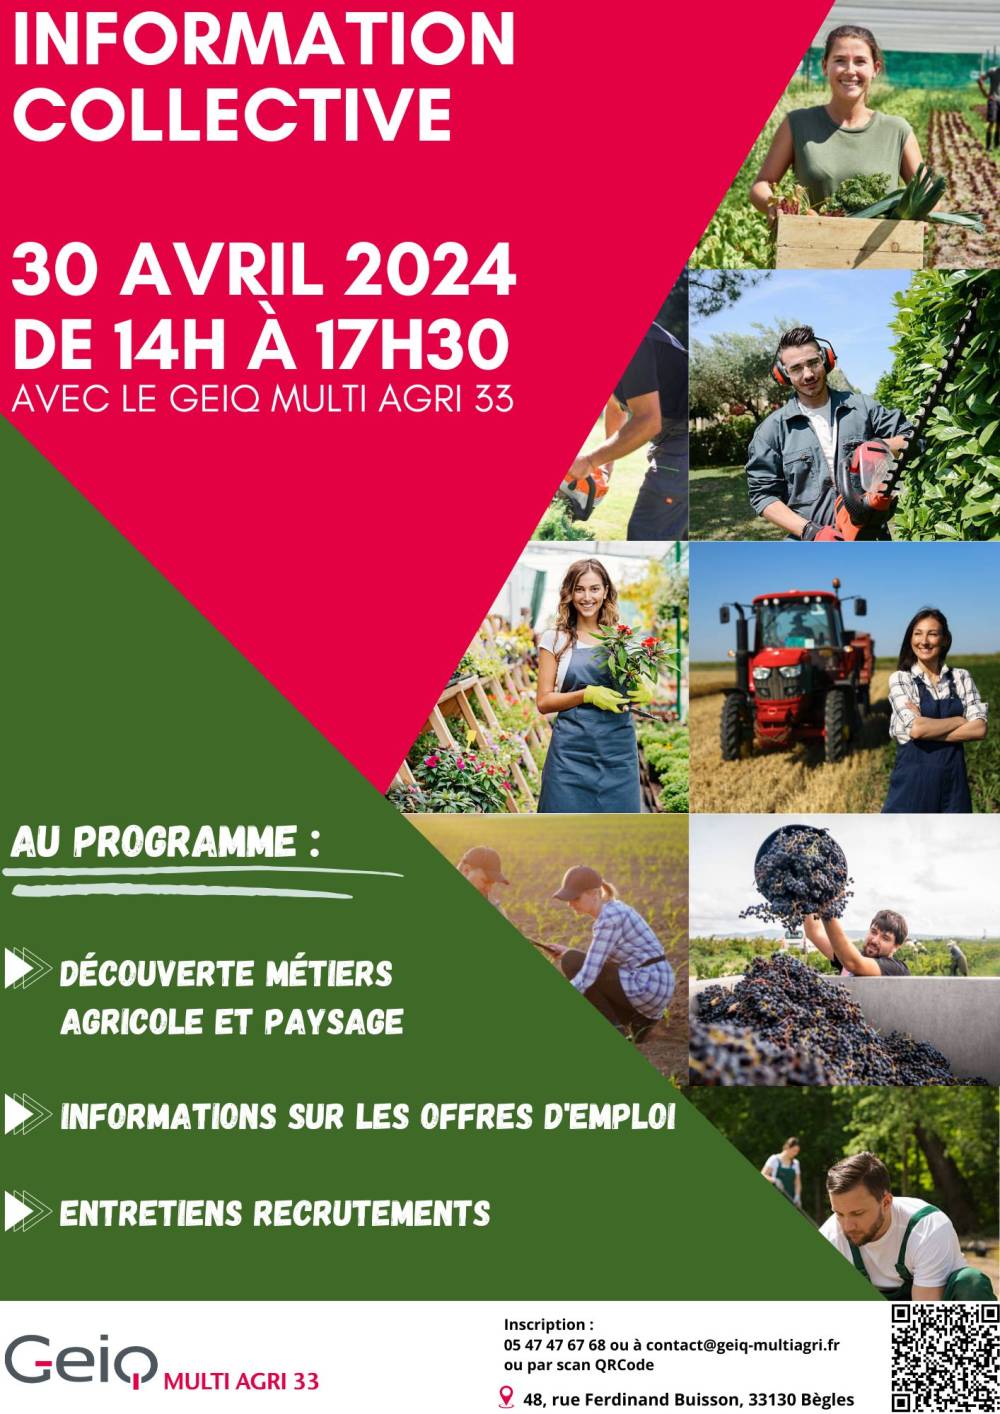 Information collective 30 avril 2024